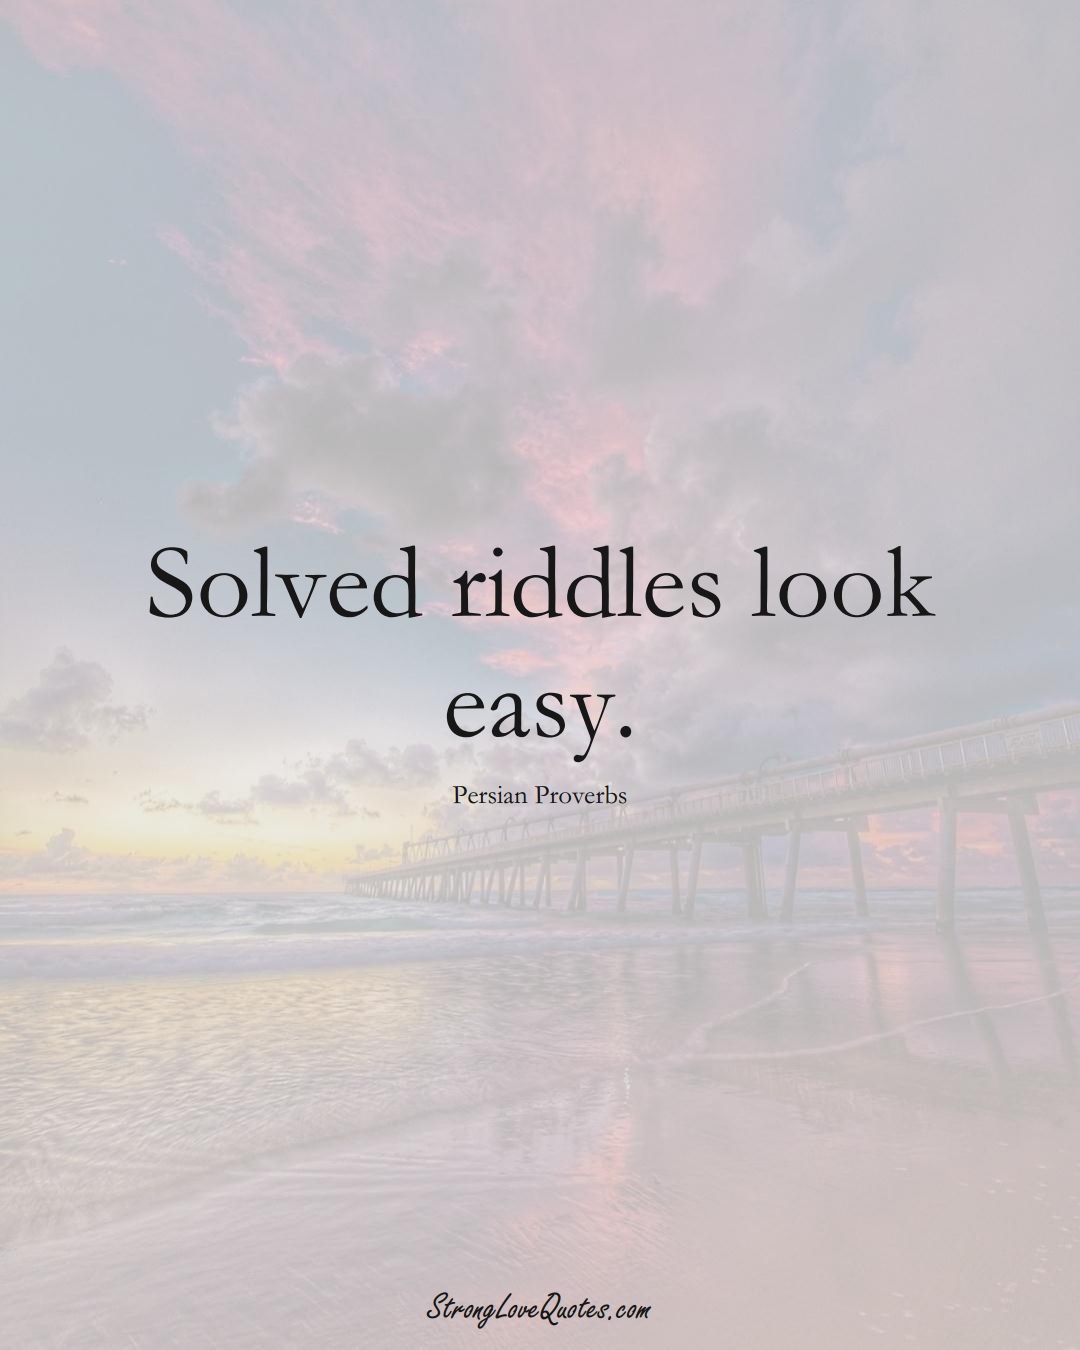 Solved riddles look easy. (Persian Sayings);  #aVarietyofCulturesSayings